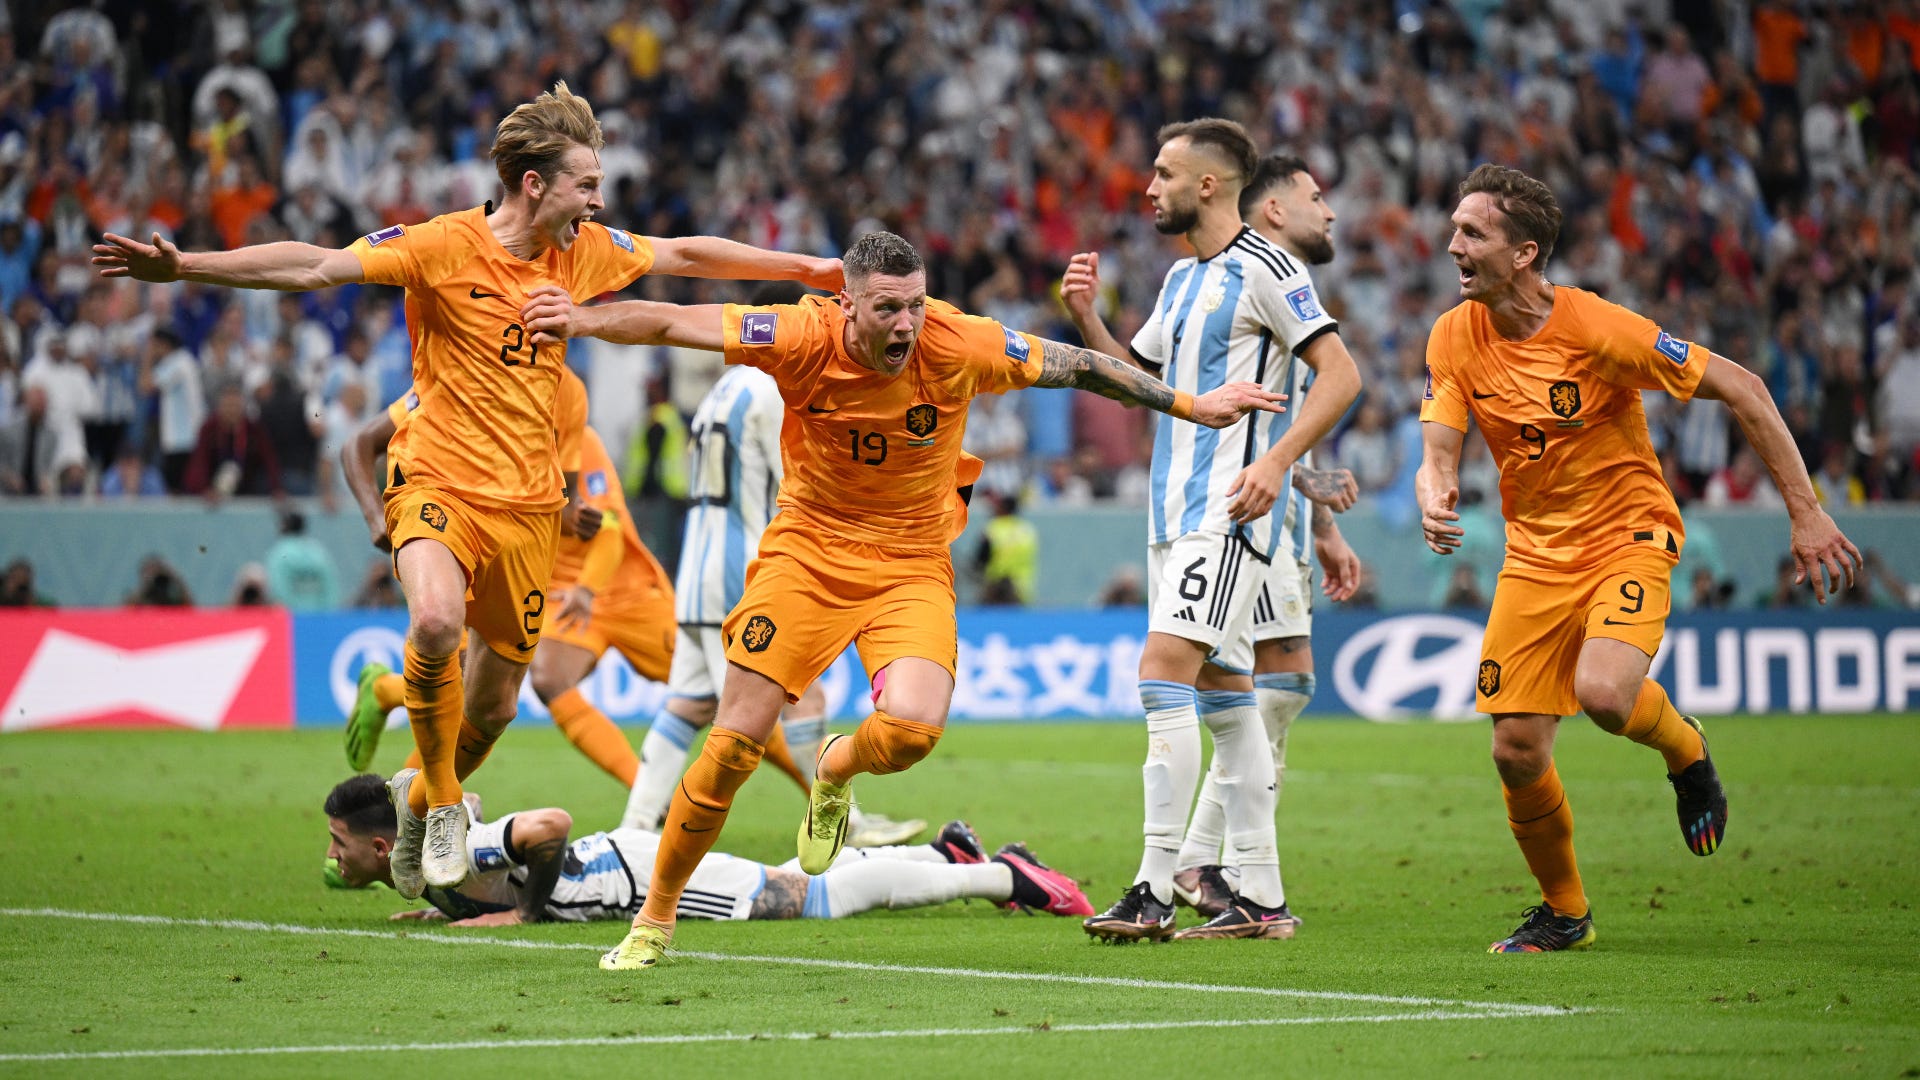 WATCH GENIUS! Netherlands force extra time against Argentina in World Cup quarter-final with outrageous 101st-minute free-kick routine Goal India